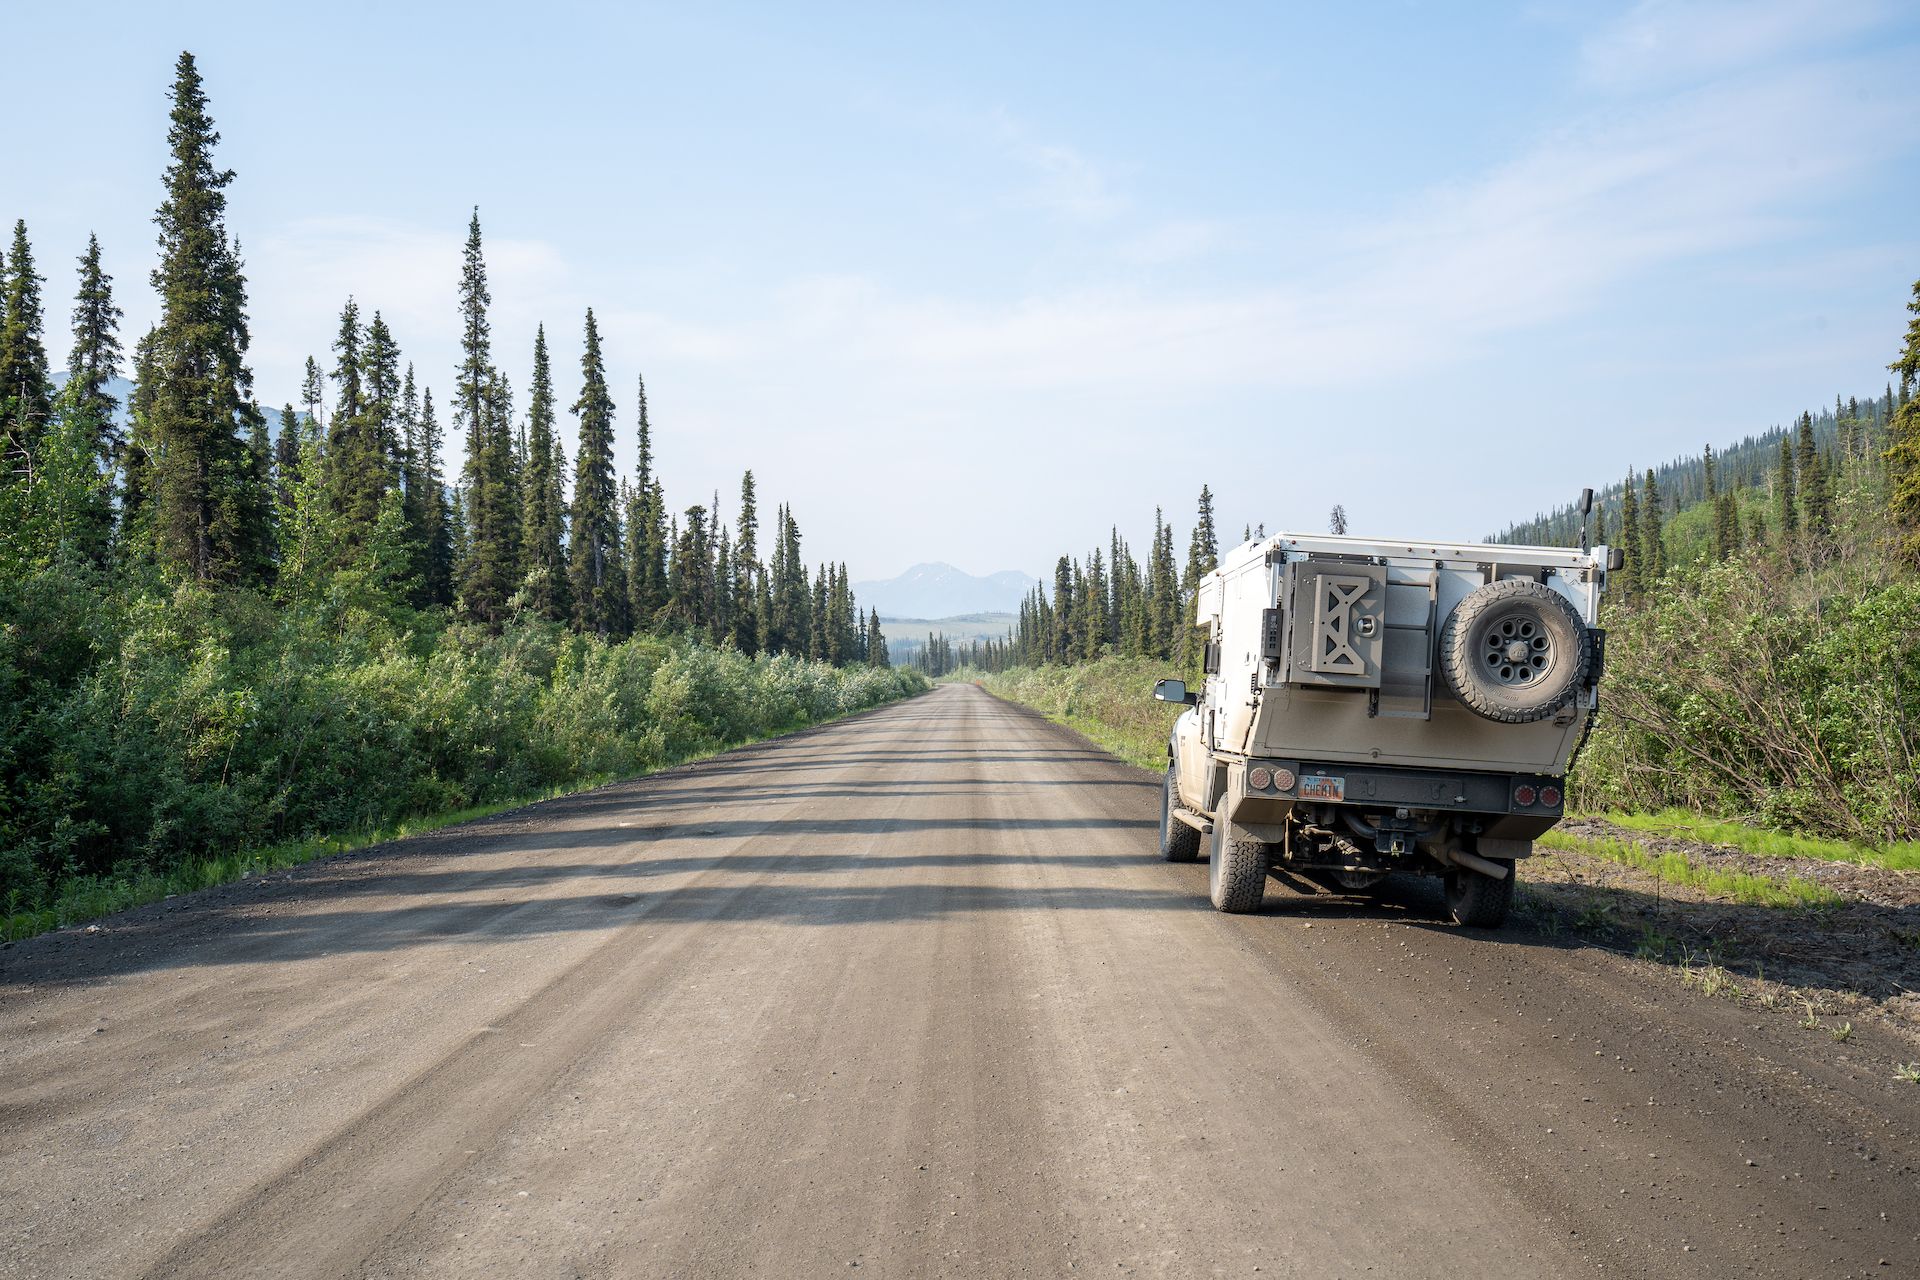 On the Dempster highway, toward the Tombstone Territorial Park